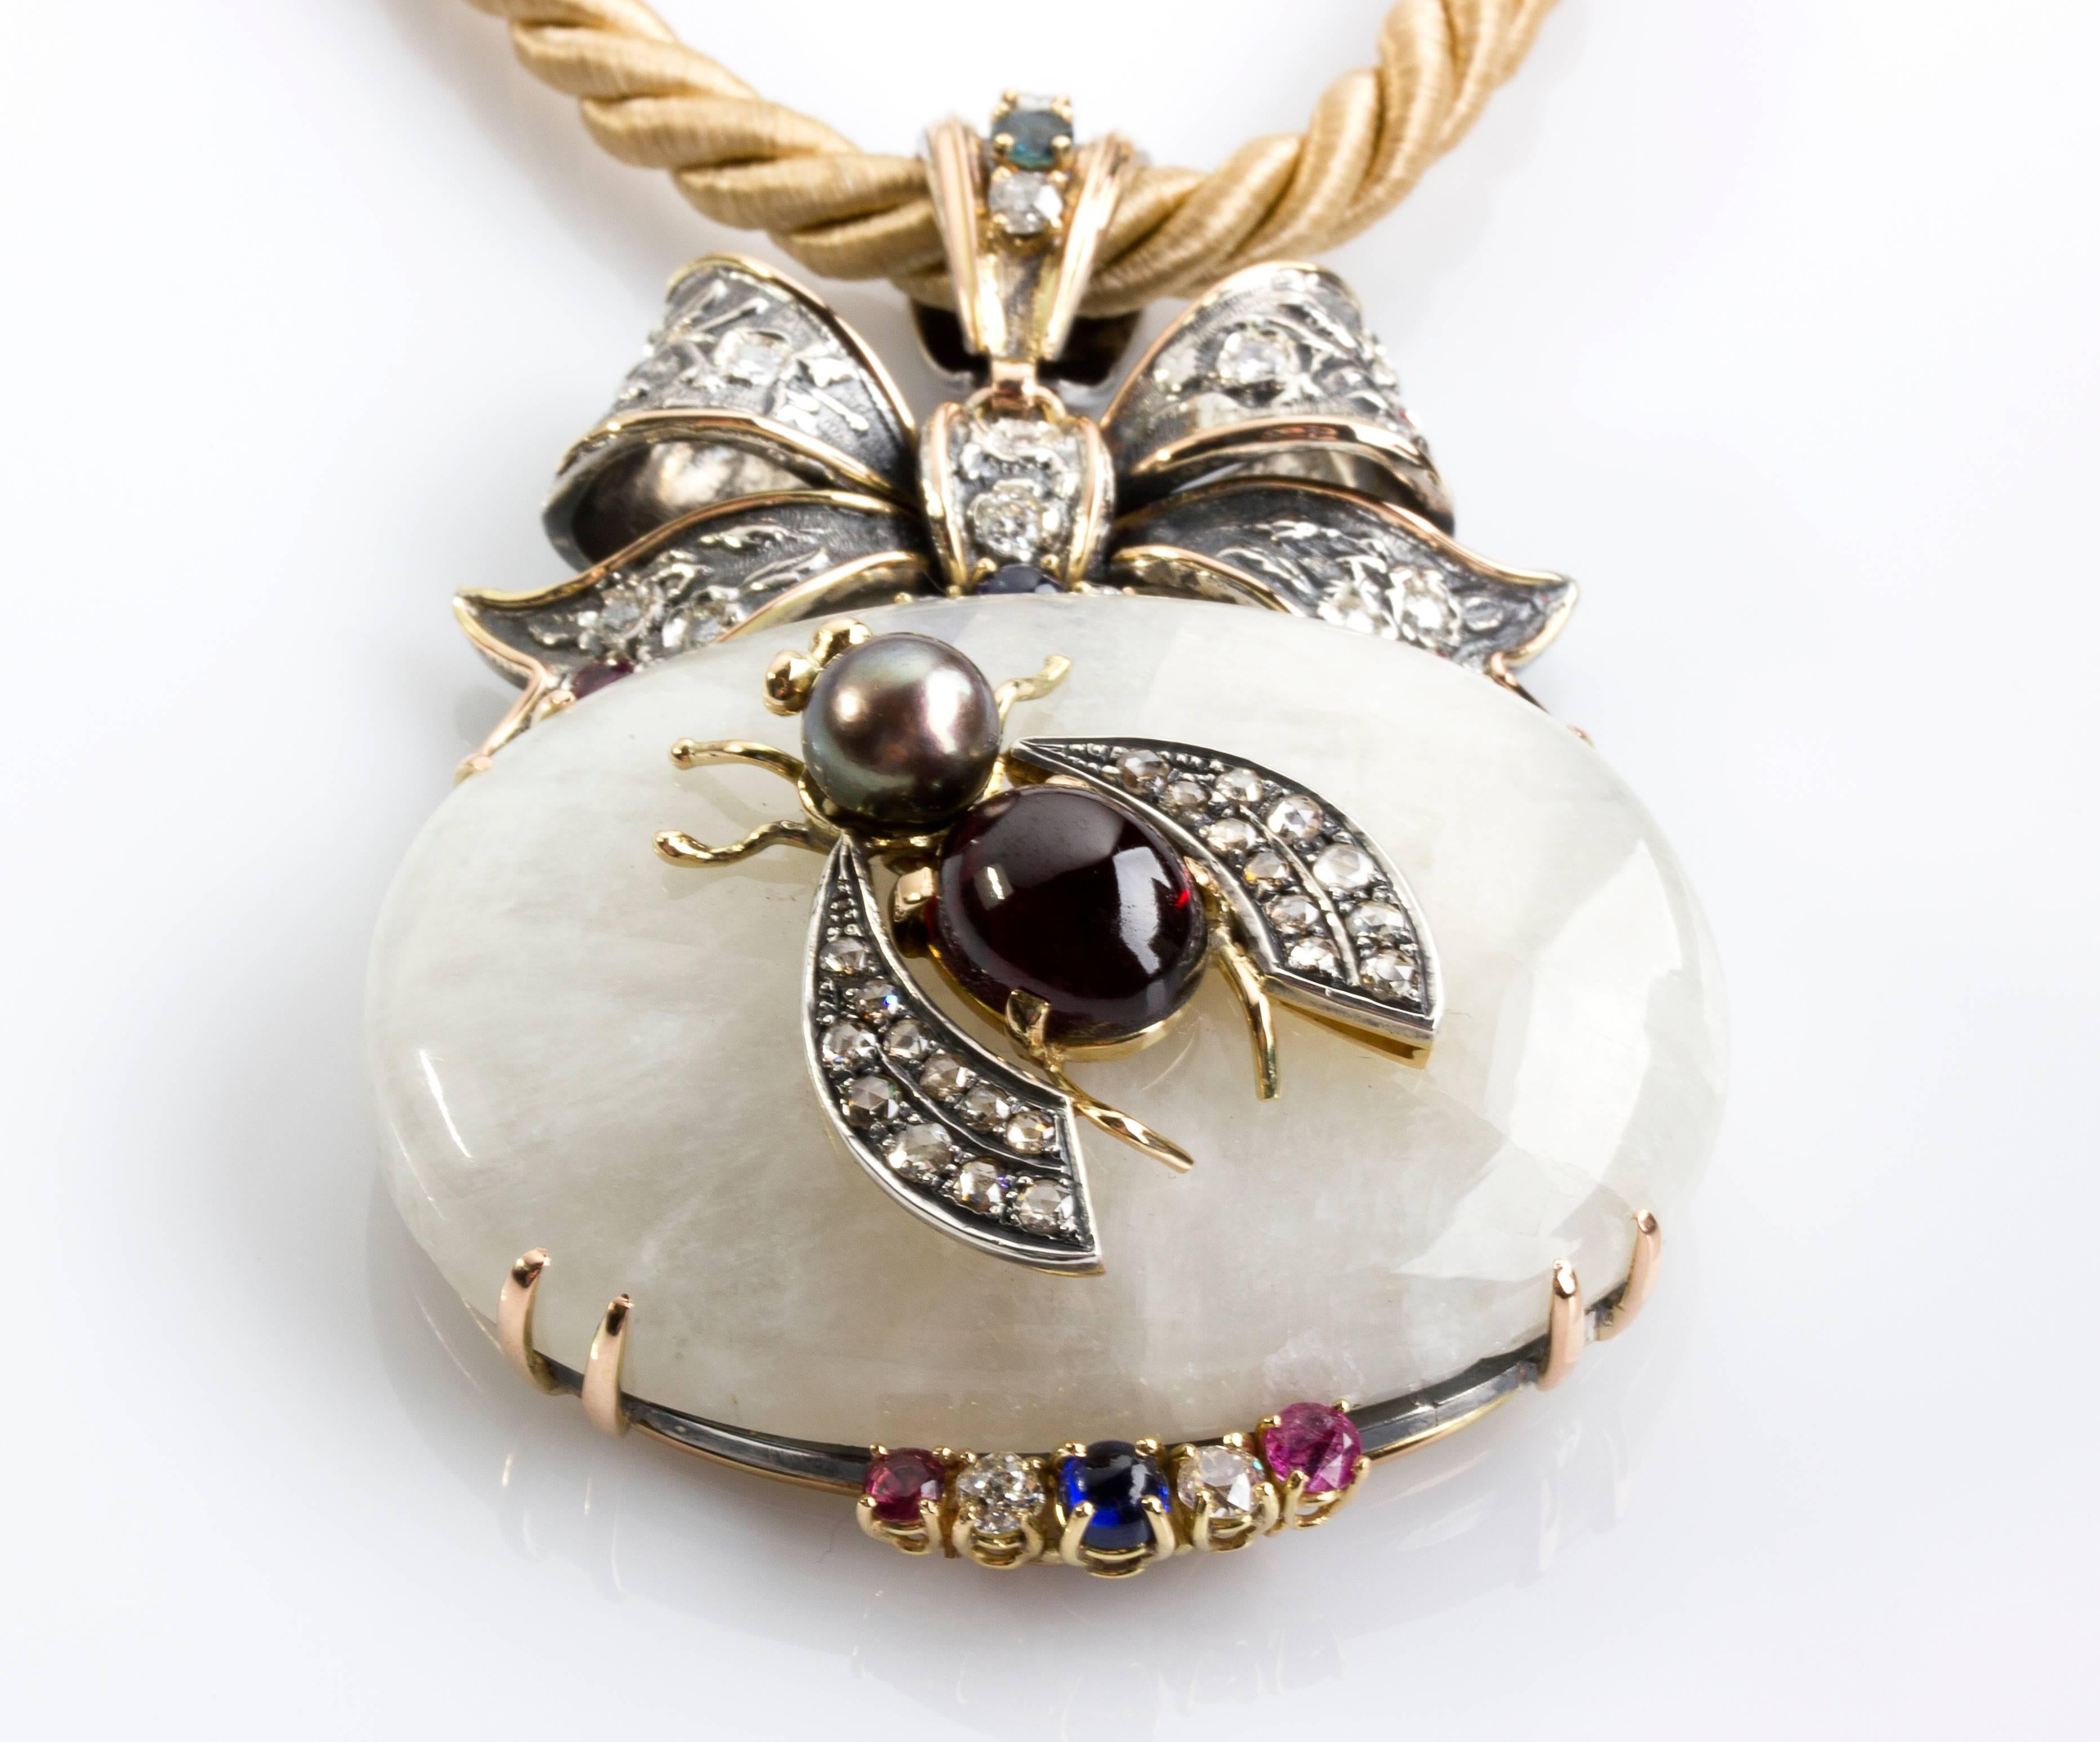 Pendant decorated with old-cut diamonds weighing 2.2 ct, rubies weighing 0.80 ct and sapphires weighing 0.55 ct. Quartz set with a fly, above there is a bow. Length total 295 mm (11 39/64 in), pendant length 80 mm (3 5/32 in), pendant width 55 mm (2